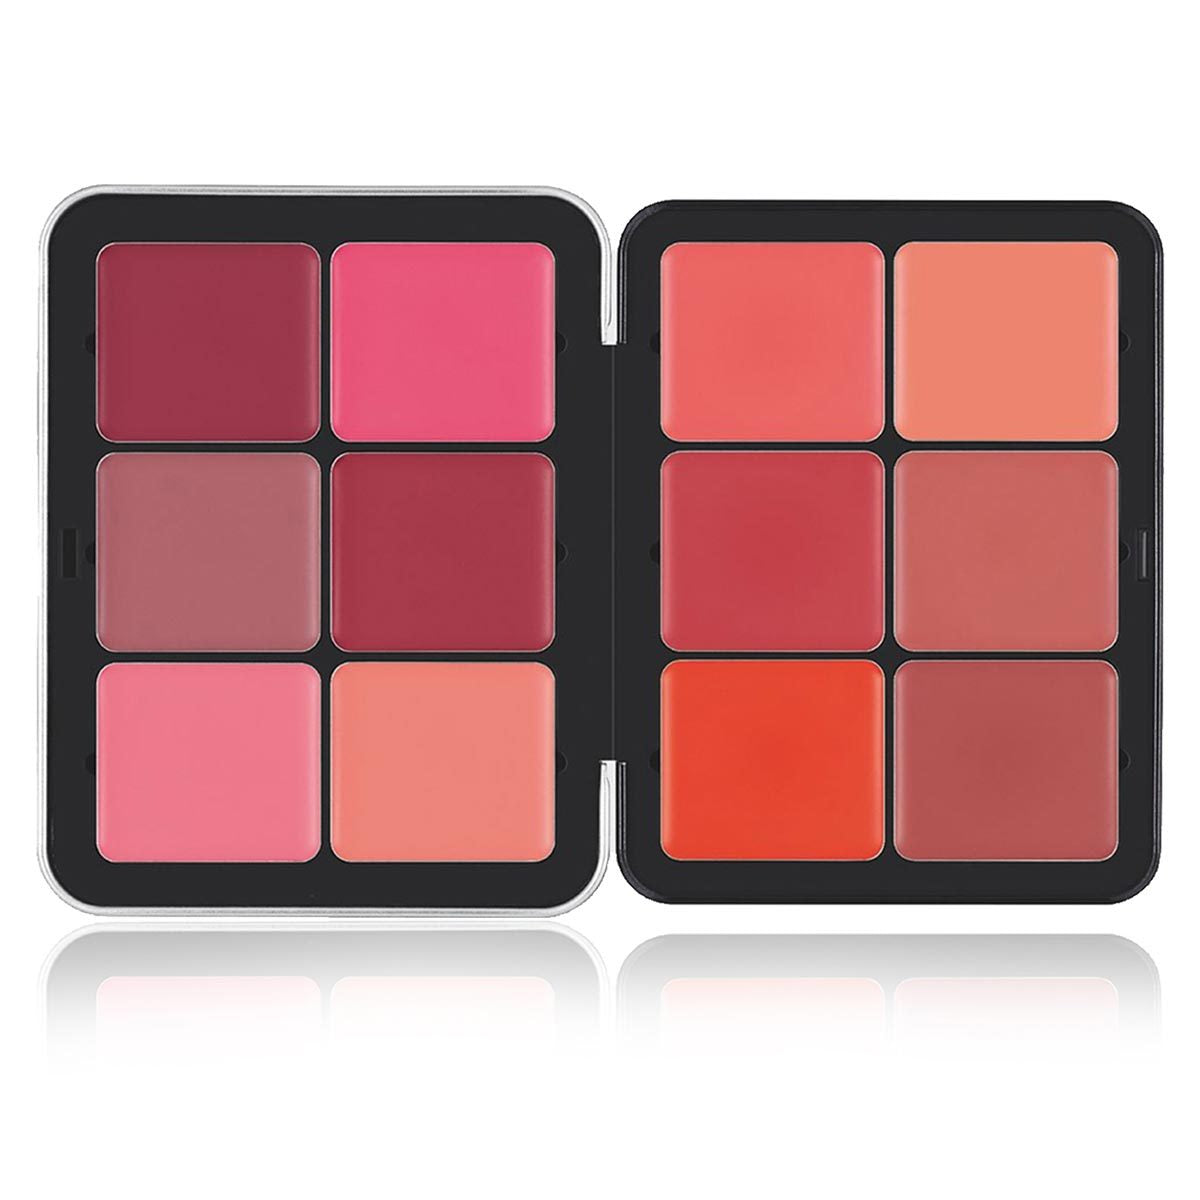 12-Color Concealer Palette: Correcting and Long-Wearing Full Coverage Makeup